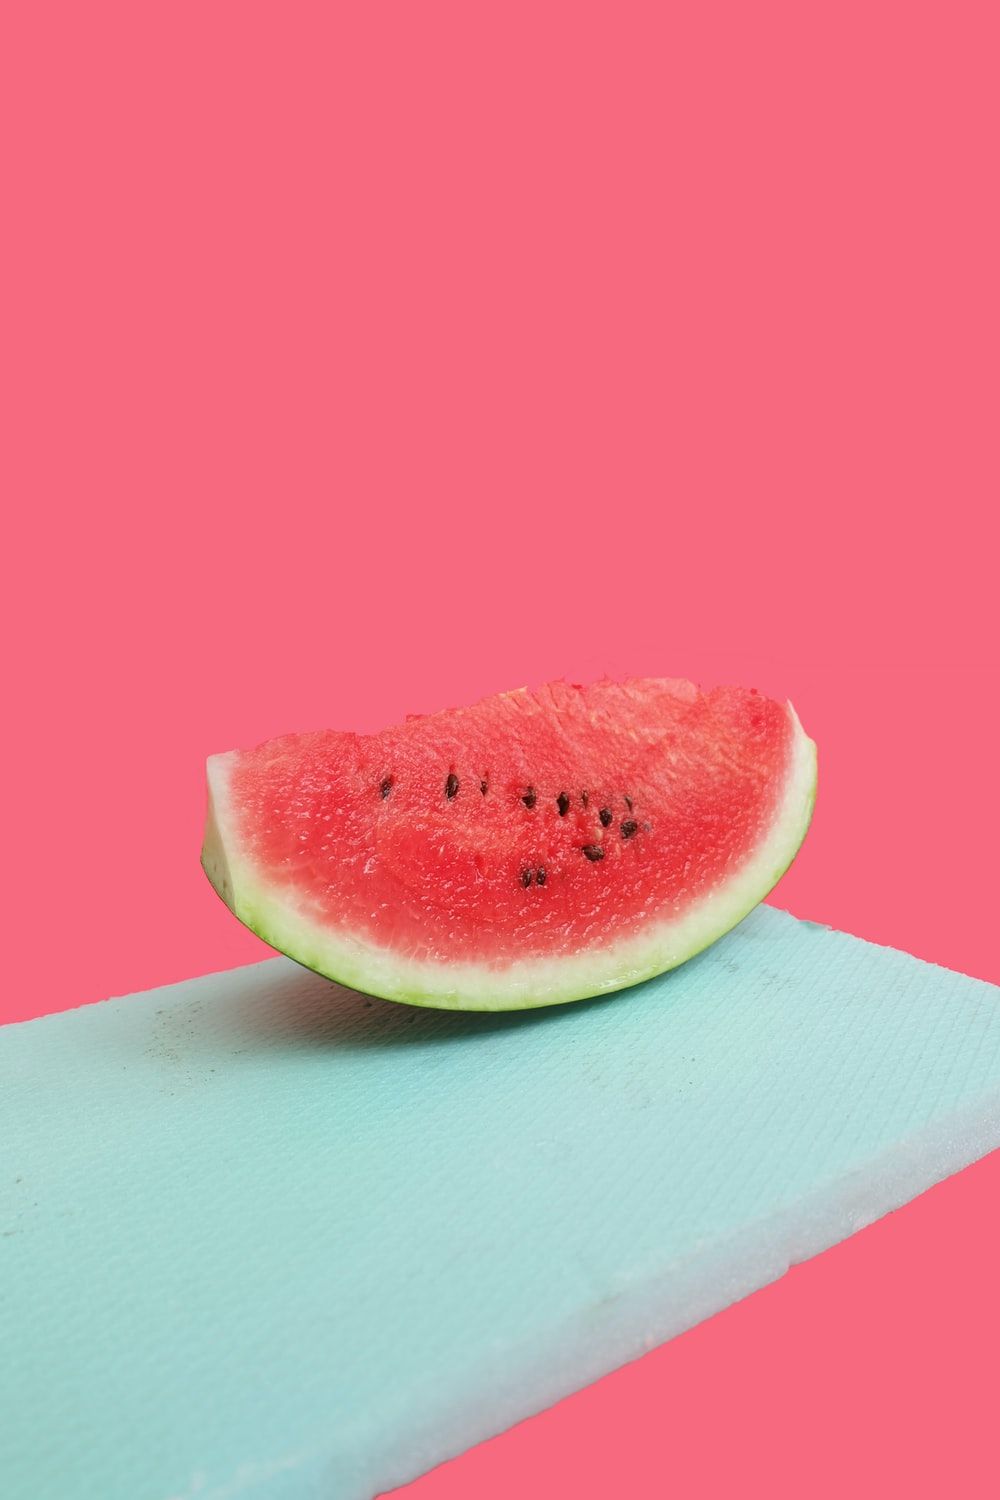 Watermelons Picture. Download Free Image